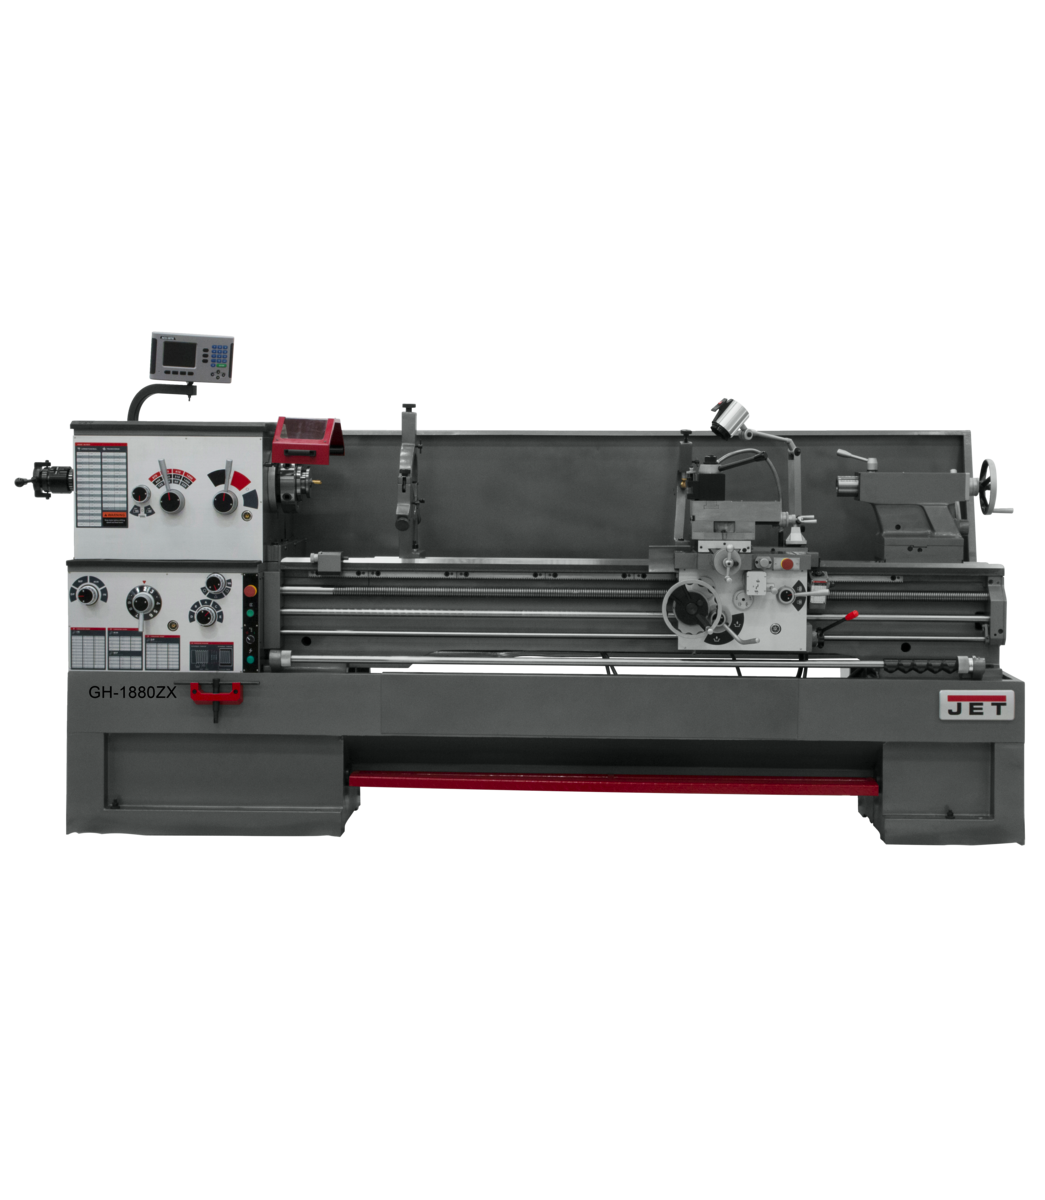 321492, GH-1880ZX Lathe with 2-axis ACU-RITE DRO 203 and Collet Closer Installed, Jet, Metalworking, Turning, Lathes